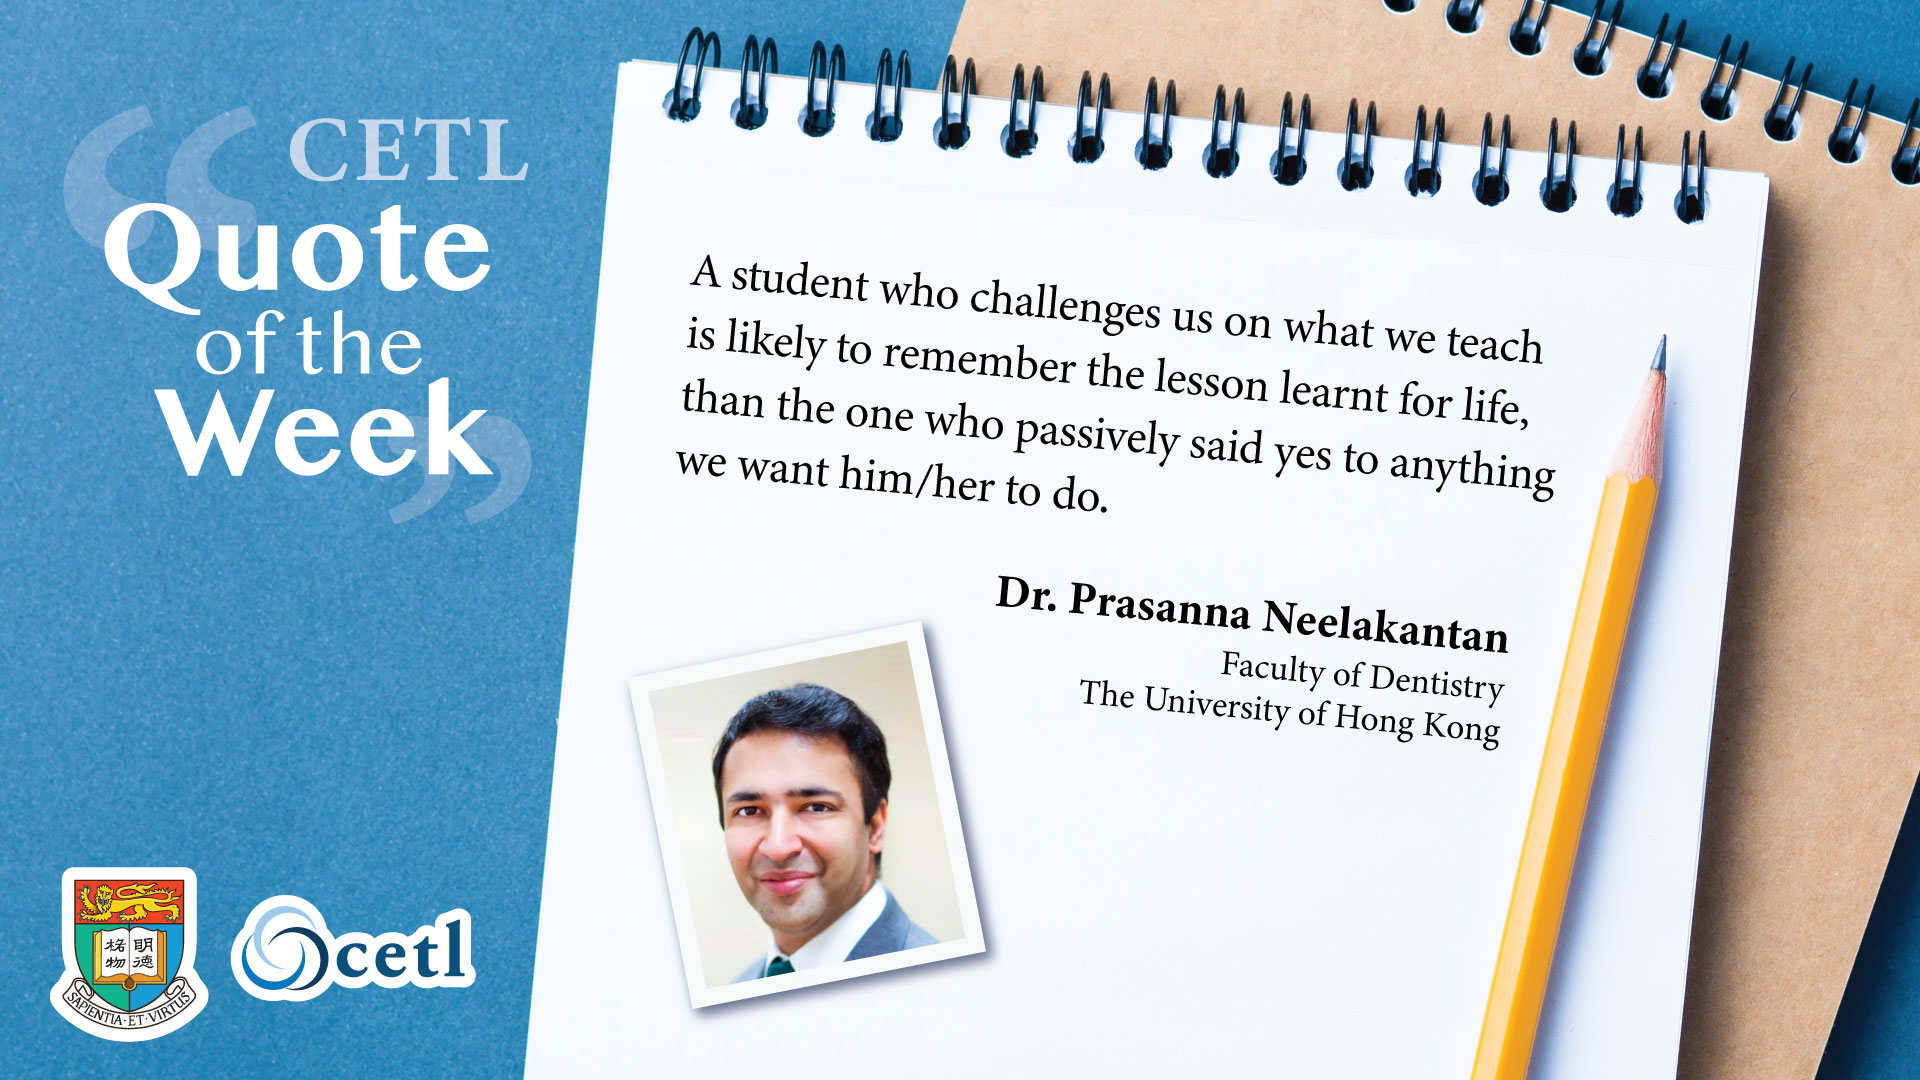 Dr. Prasanna Neelakantan - A student who challenges us on what we teach is likely to remember the lesson learnt for life, than the one who passively said yes to anything we want him/her to do.